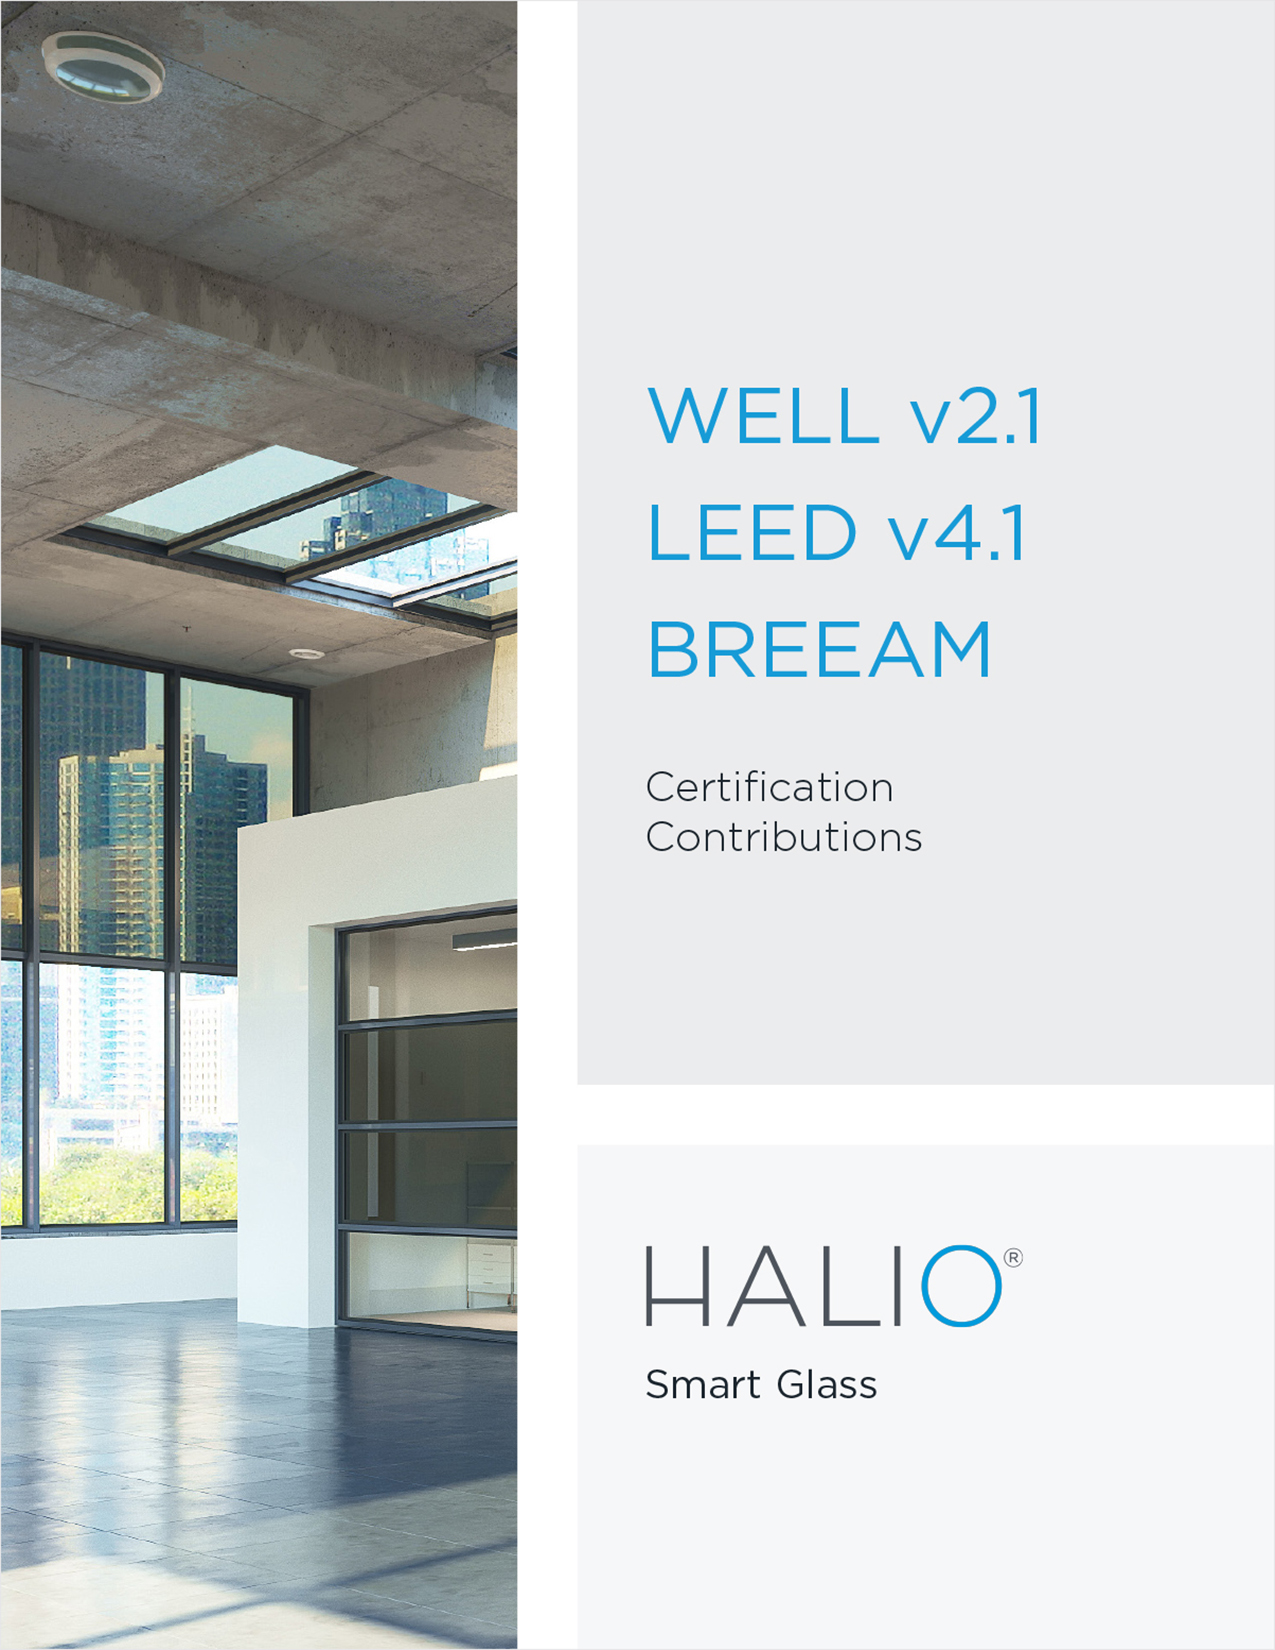 Halio Certification Contributions for WELL, LEED, and BREEAM